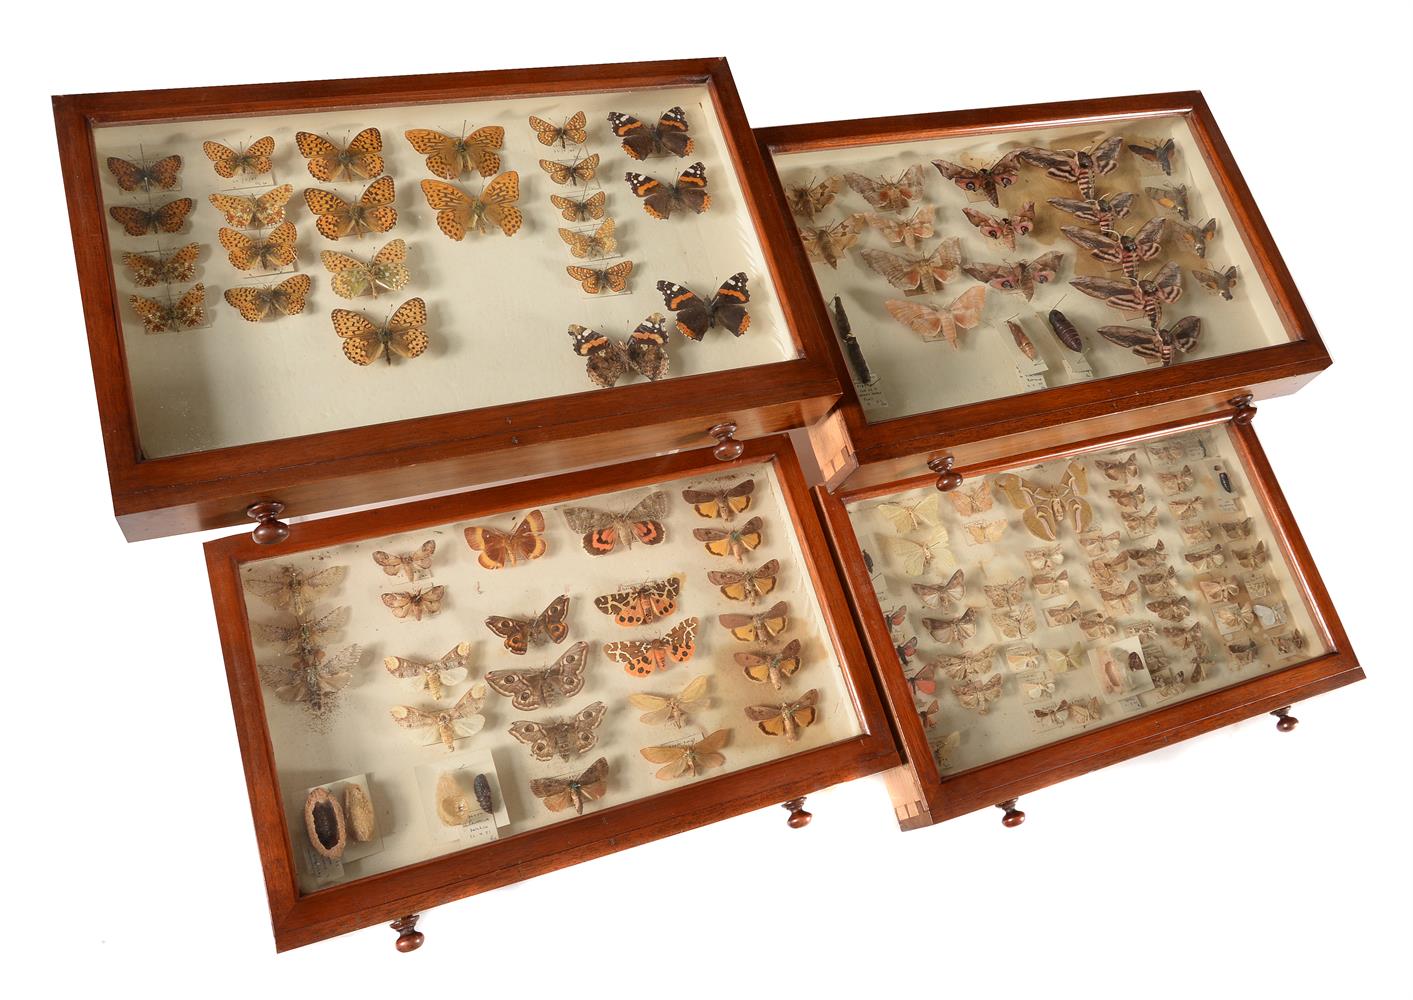 Y A mahogany collectors cabinet, containing a collection of British Butterflies and Moths - Image 4 of 5